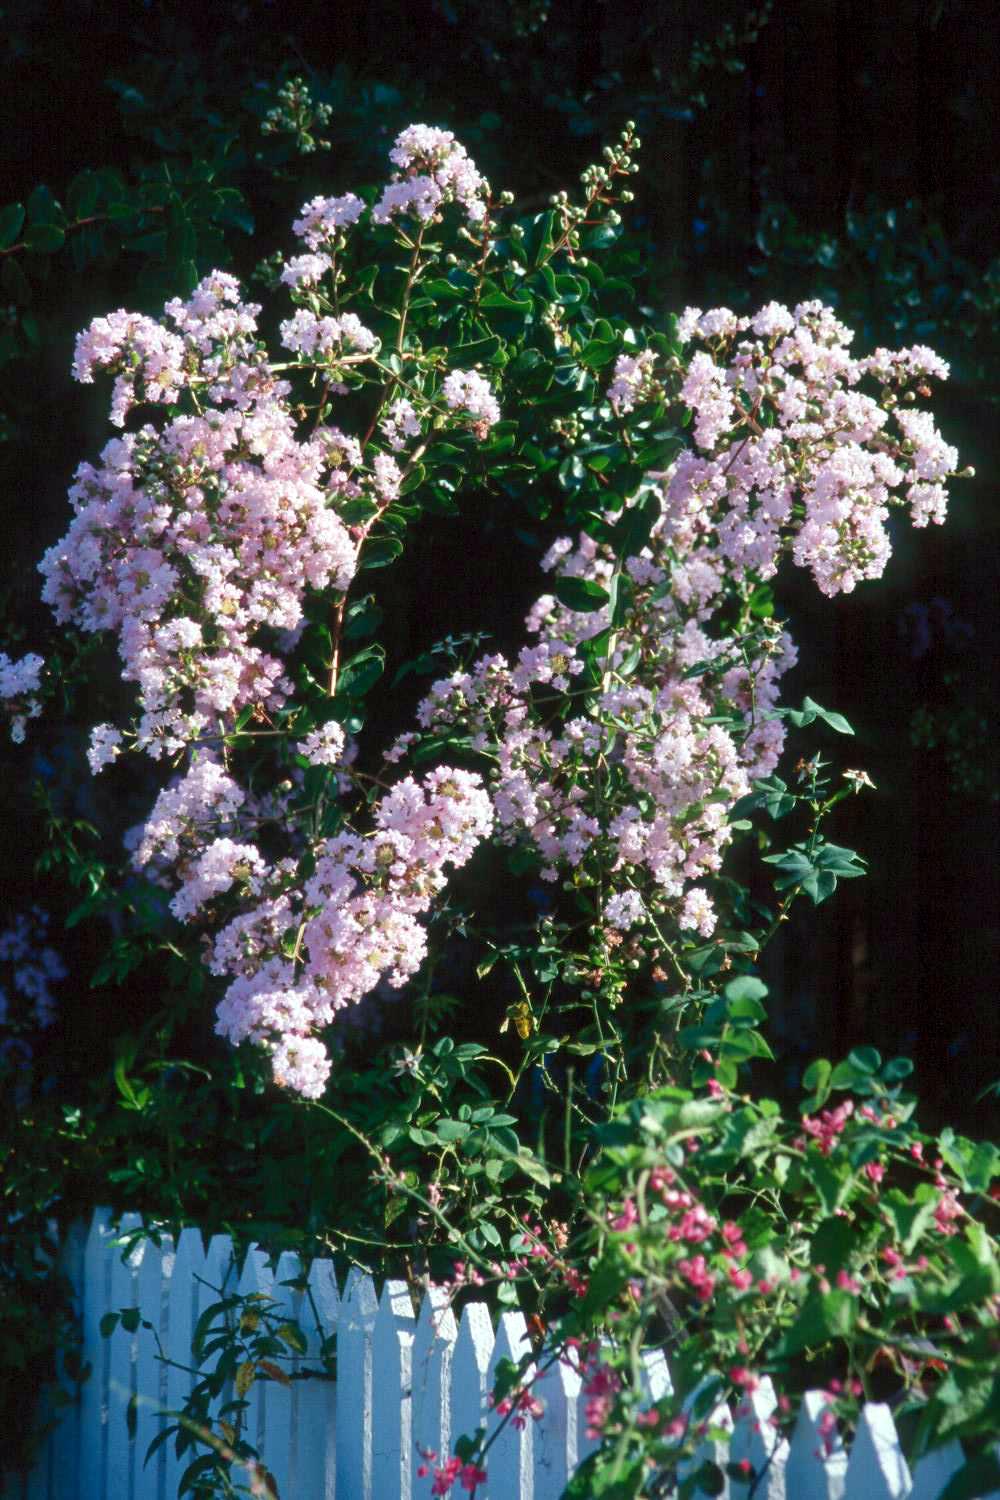 The crape myrtle is widely planted throughout the South because it flowers during the hot summer months when little else is in flower.